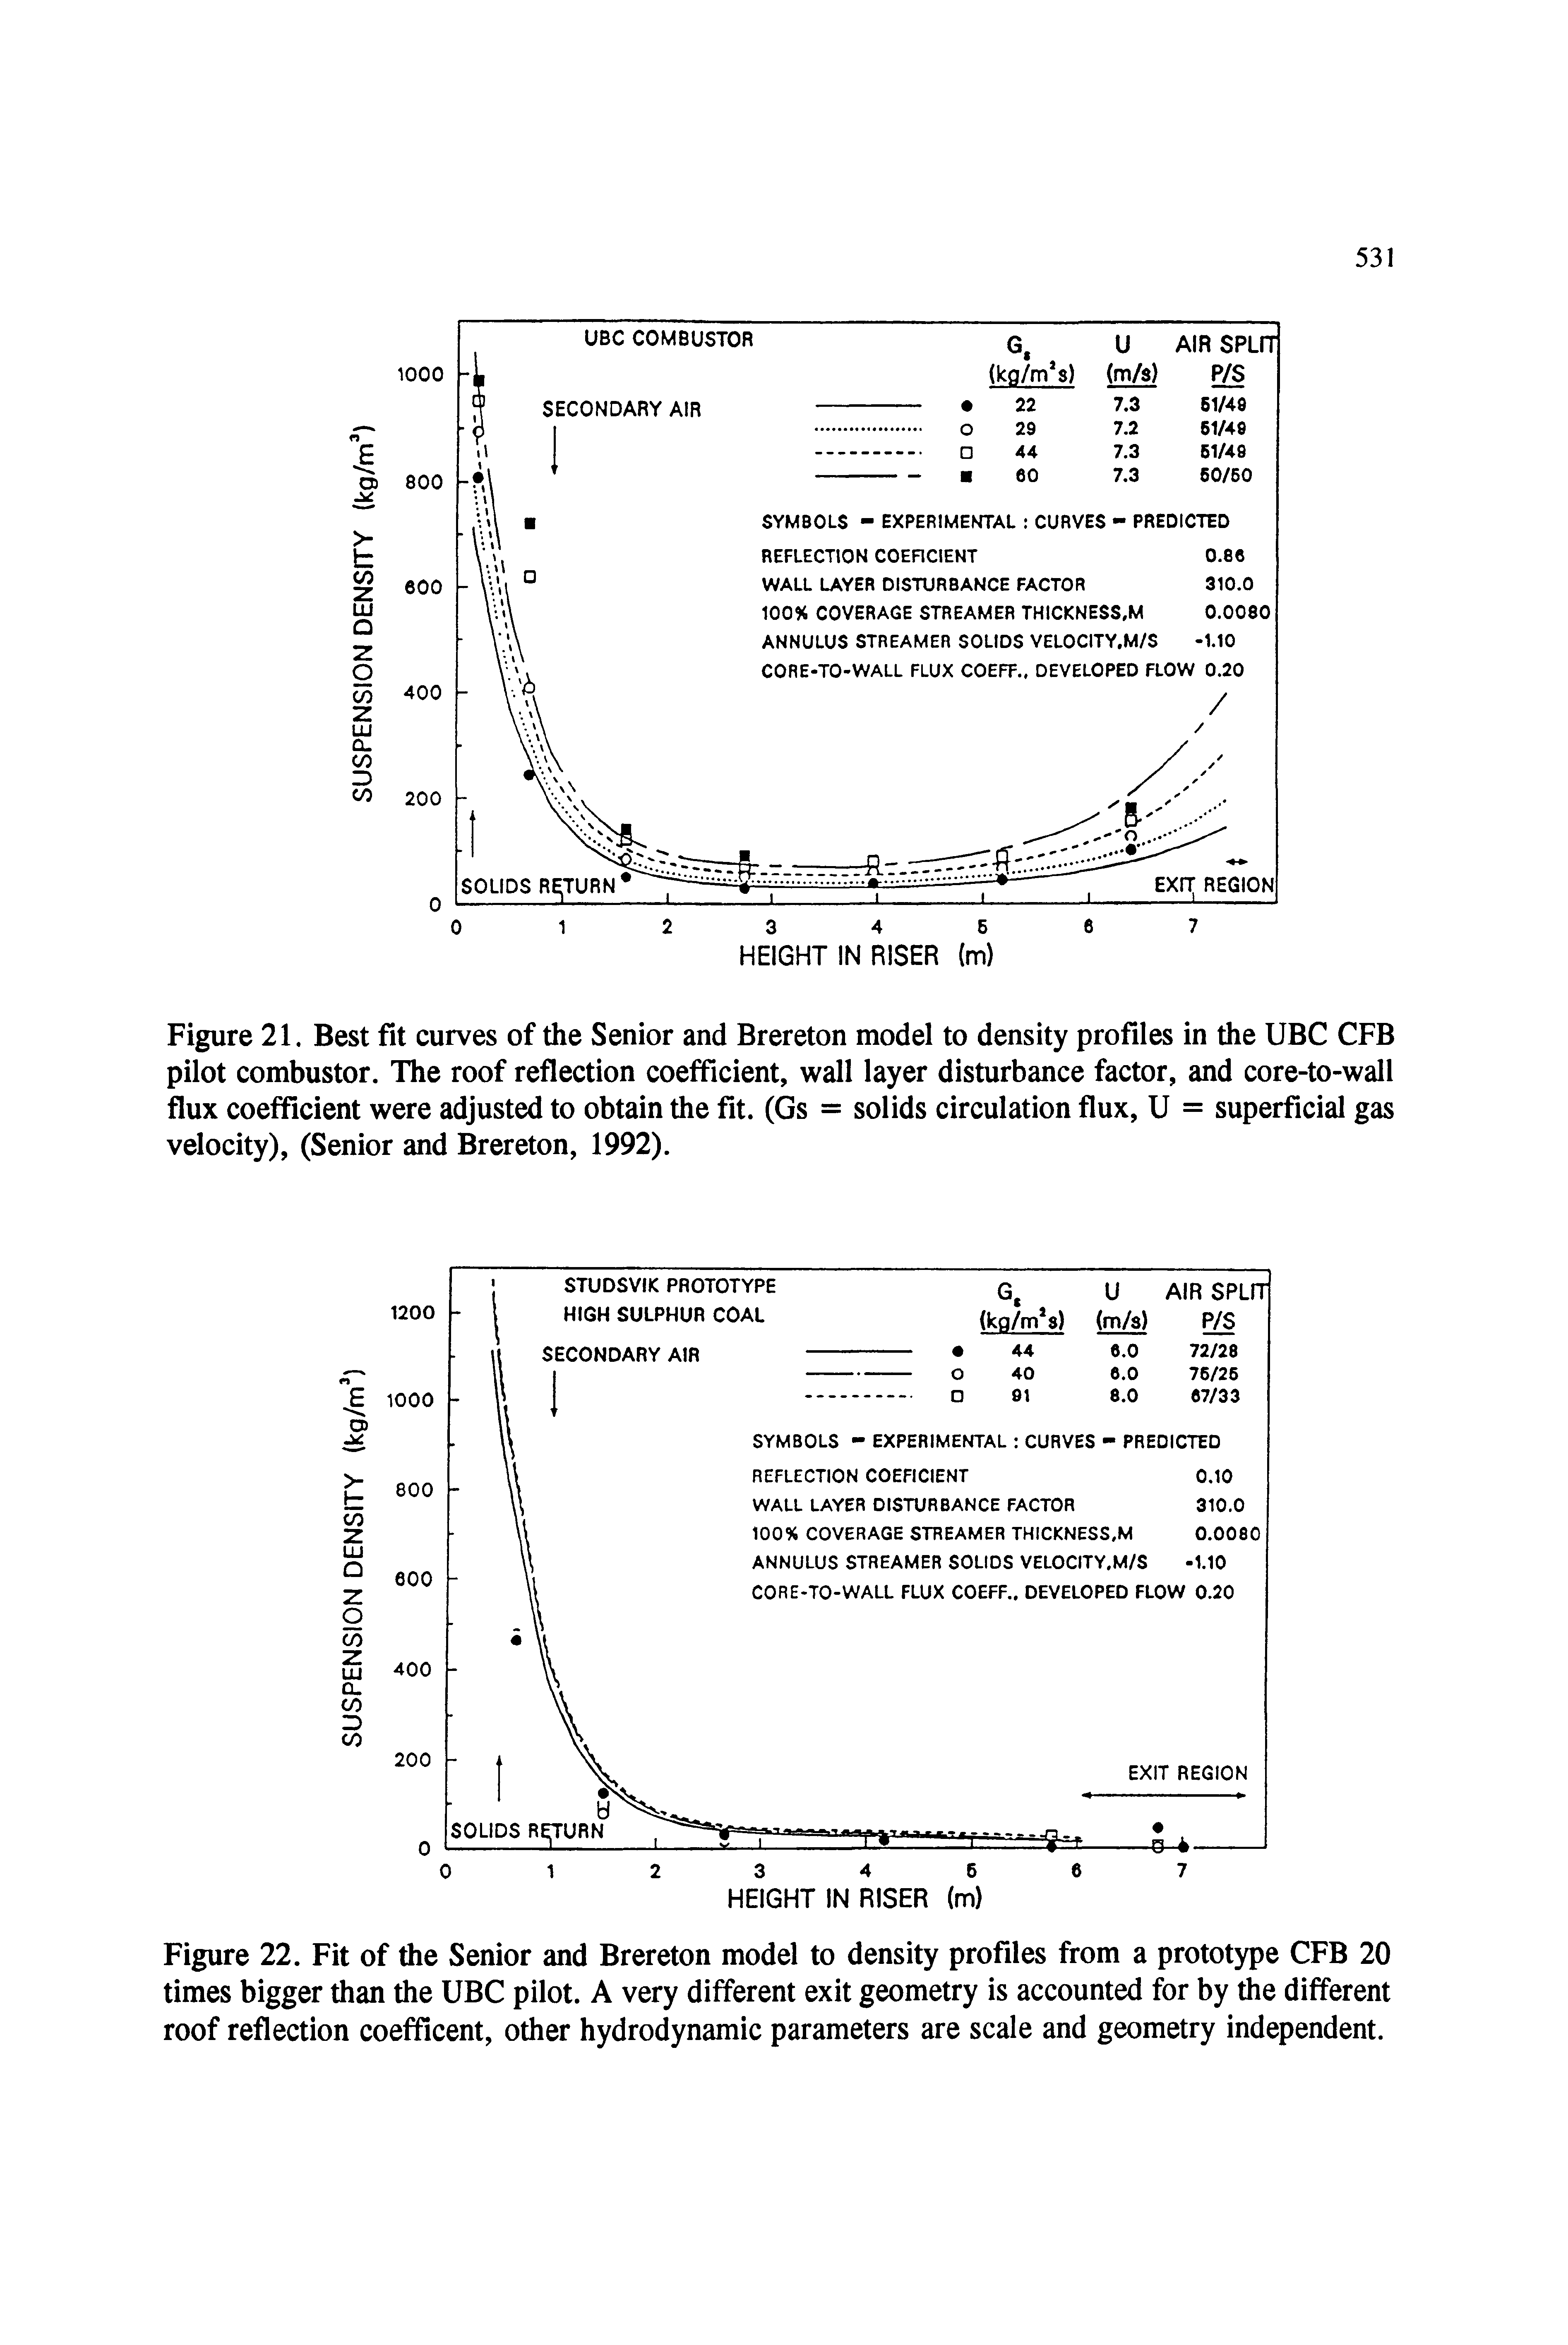 Figure 21. Best fit curves of the Senior and Brereton model to density profiles in the UBC CFB pilot combustor. The roof reflection coefficient, wall layer disturbance factor, and core-to-wall flux coefficient were adjusted to obtain the fit. (Gs = solids circulation flux, U = superficial gas velocity), (Senior and Brereton, 1992).